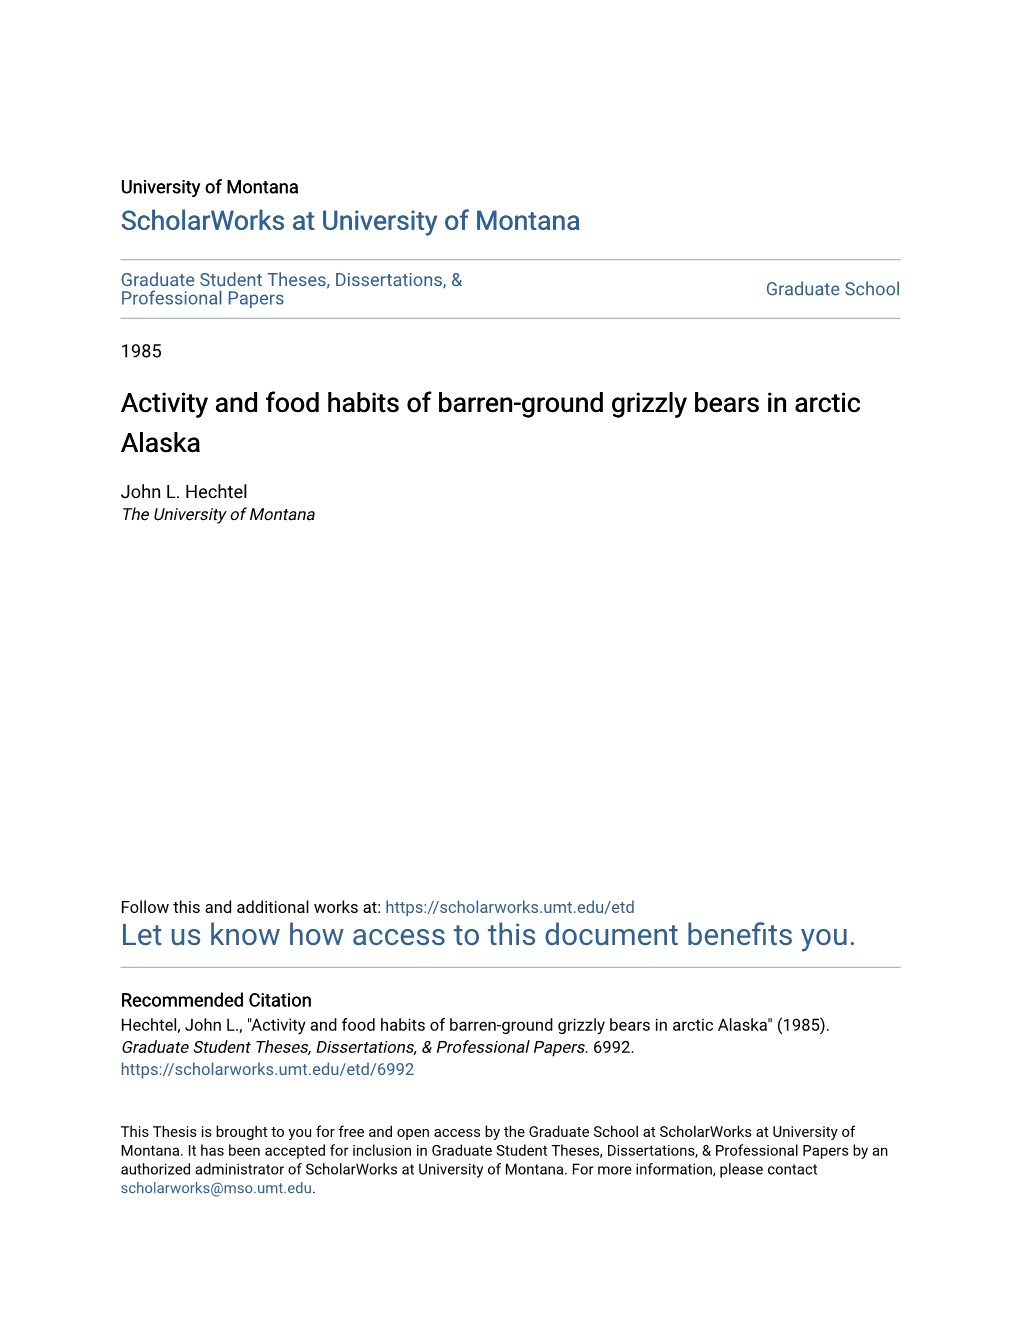 Activity and Food Habits of Barren-Ground Grizzly Bears in Arctic Alaska